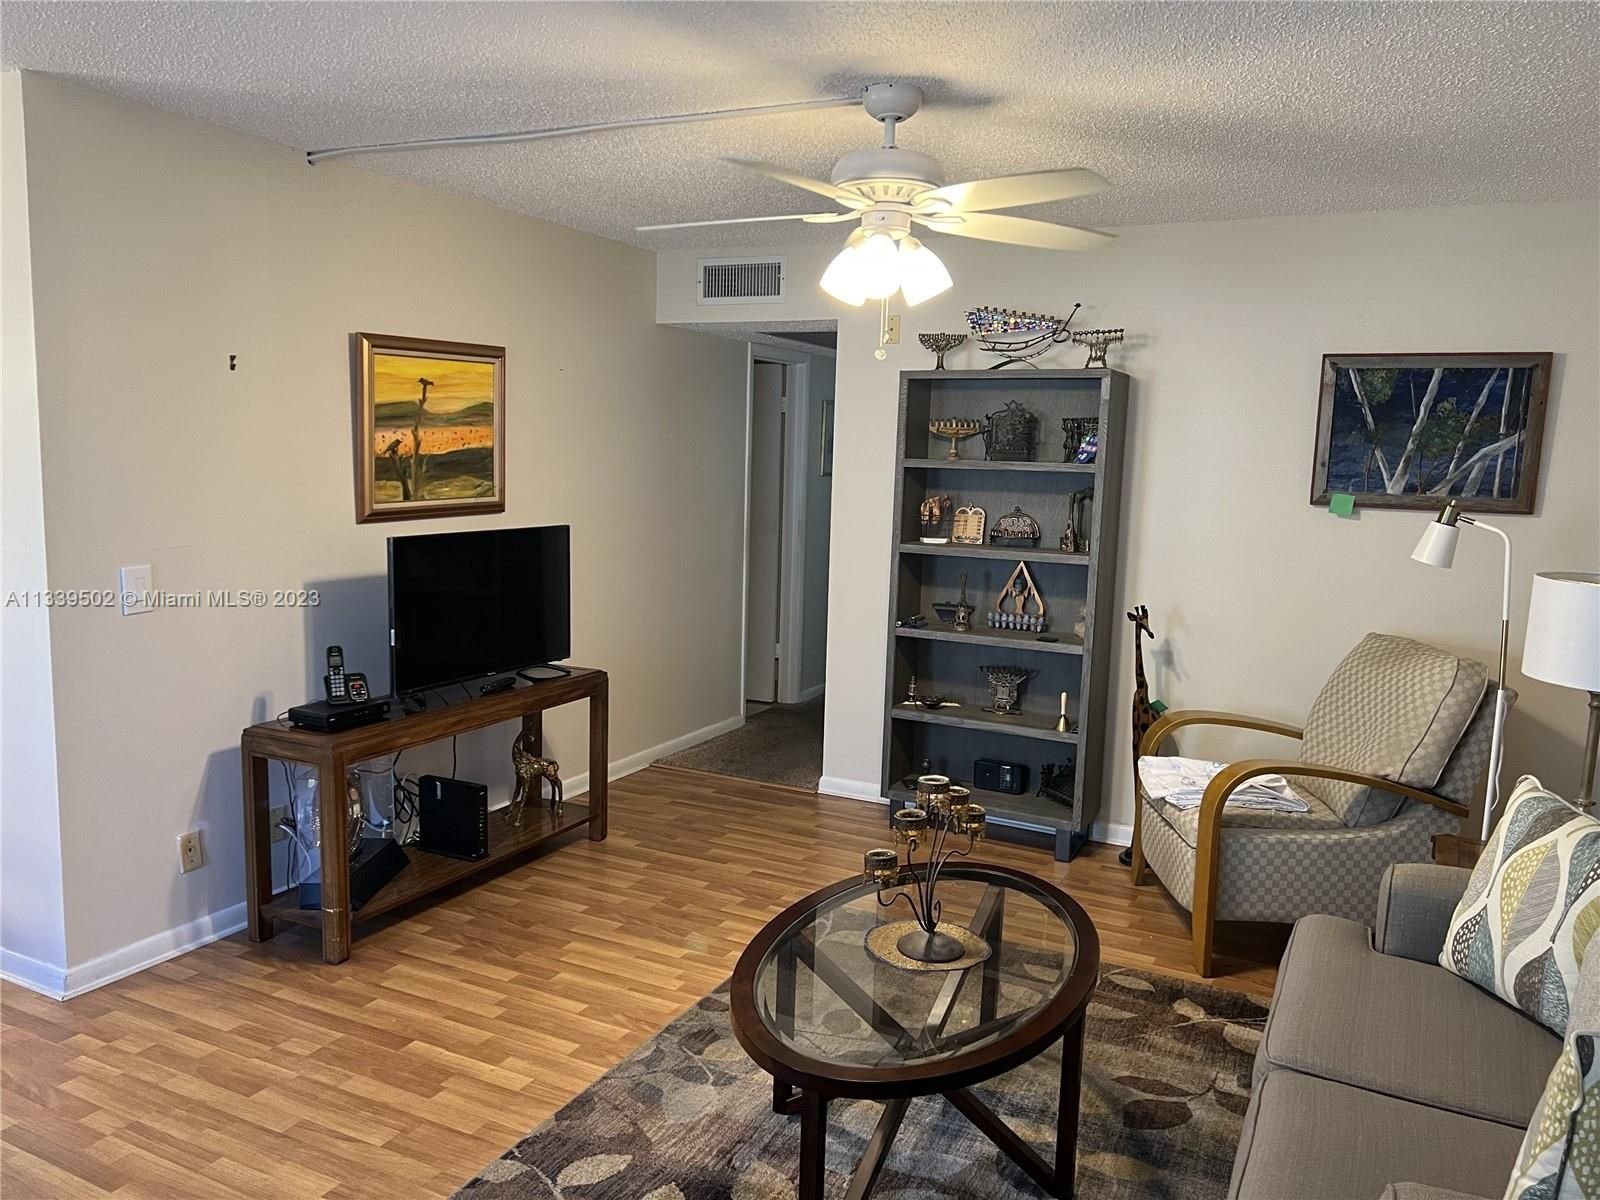 Real estate property located at 82 Upminster D #82, Broward County, Deerfield Beach, FL